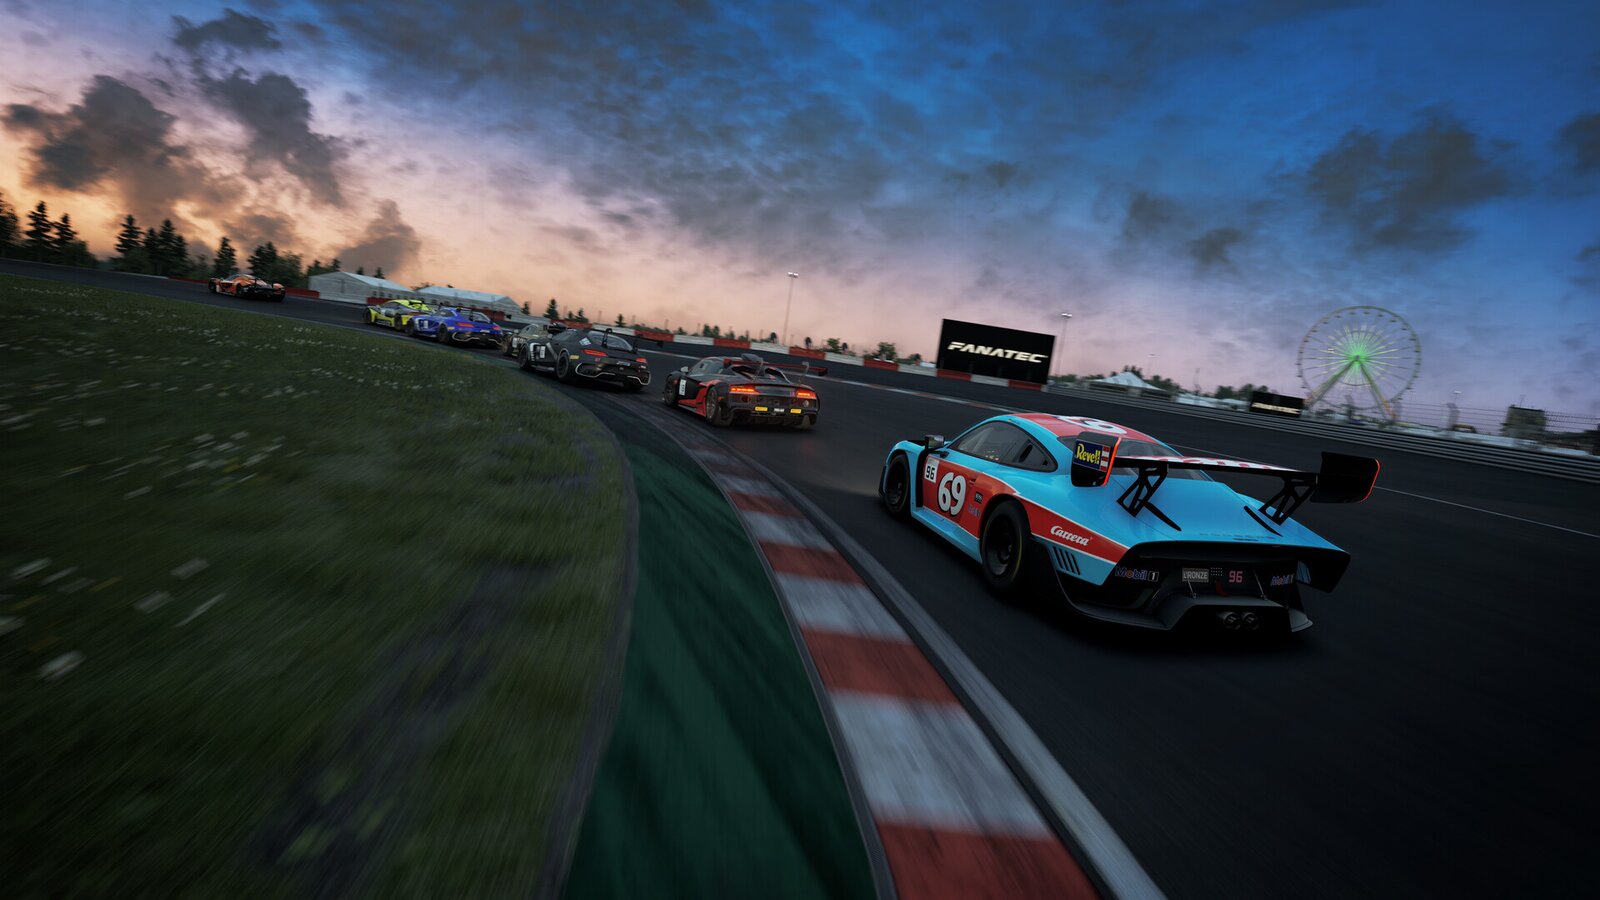 Assetto Corsa Competizione: Nurburgring 24h Pack